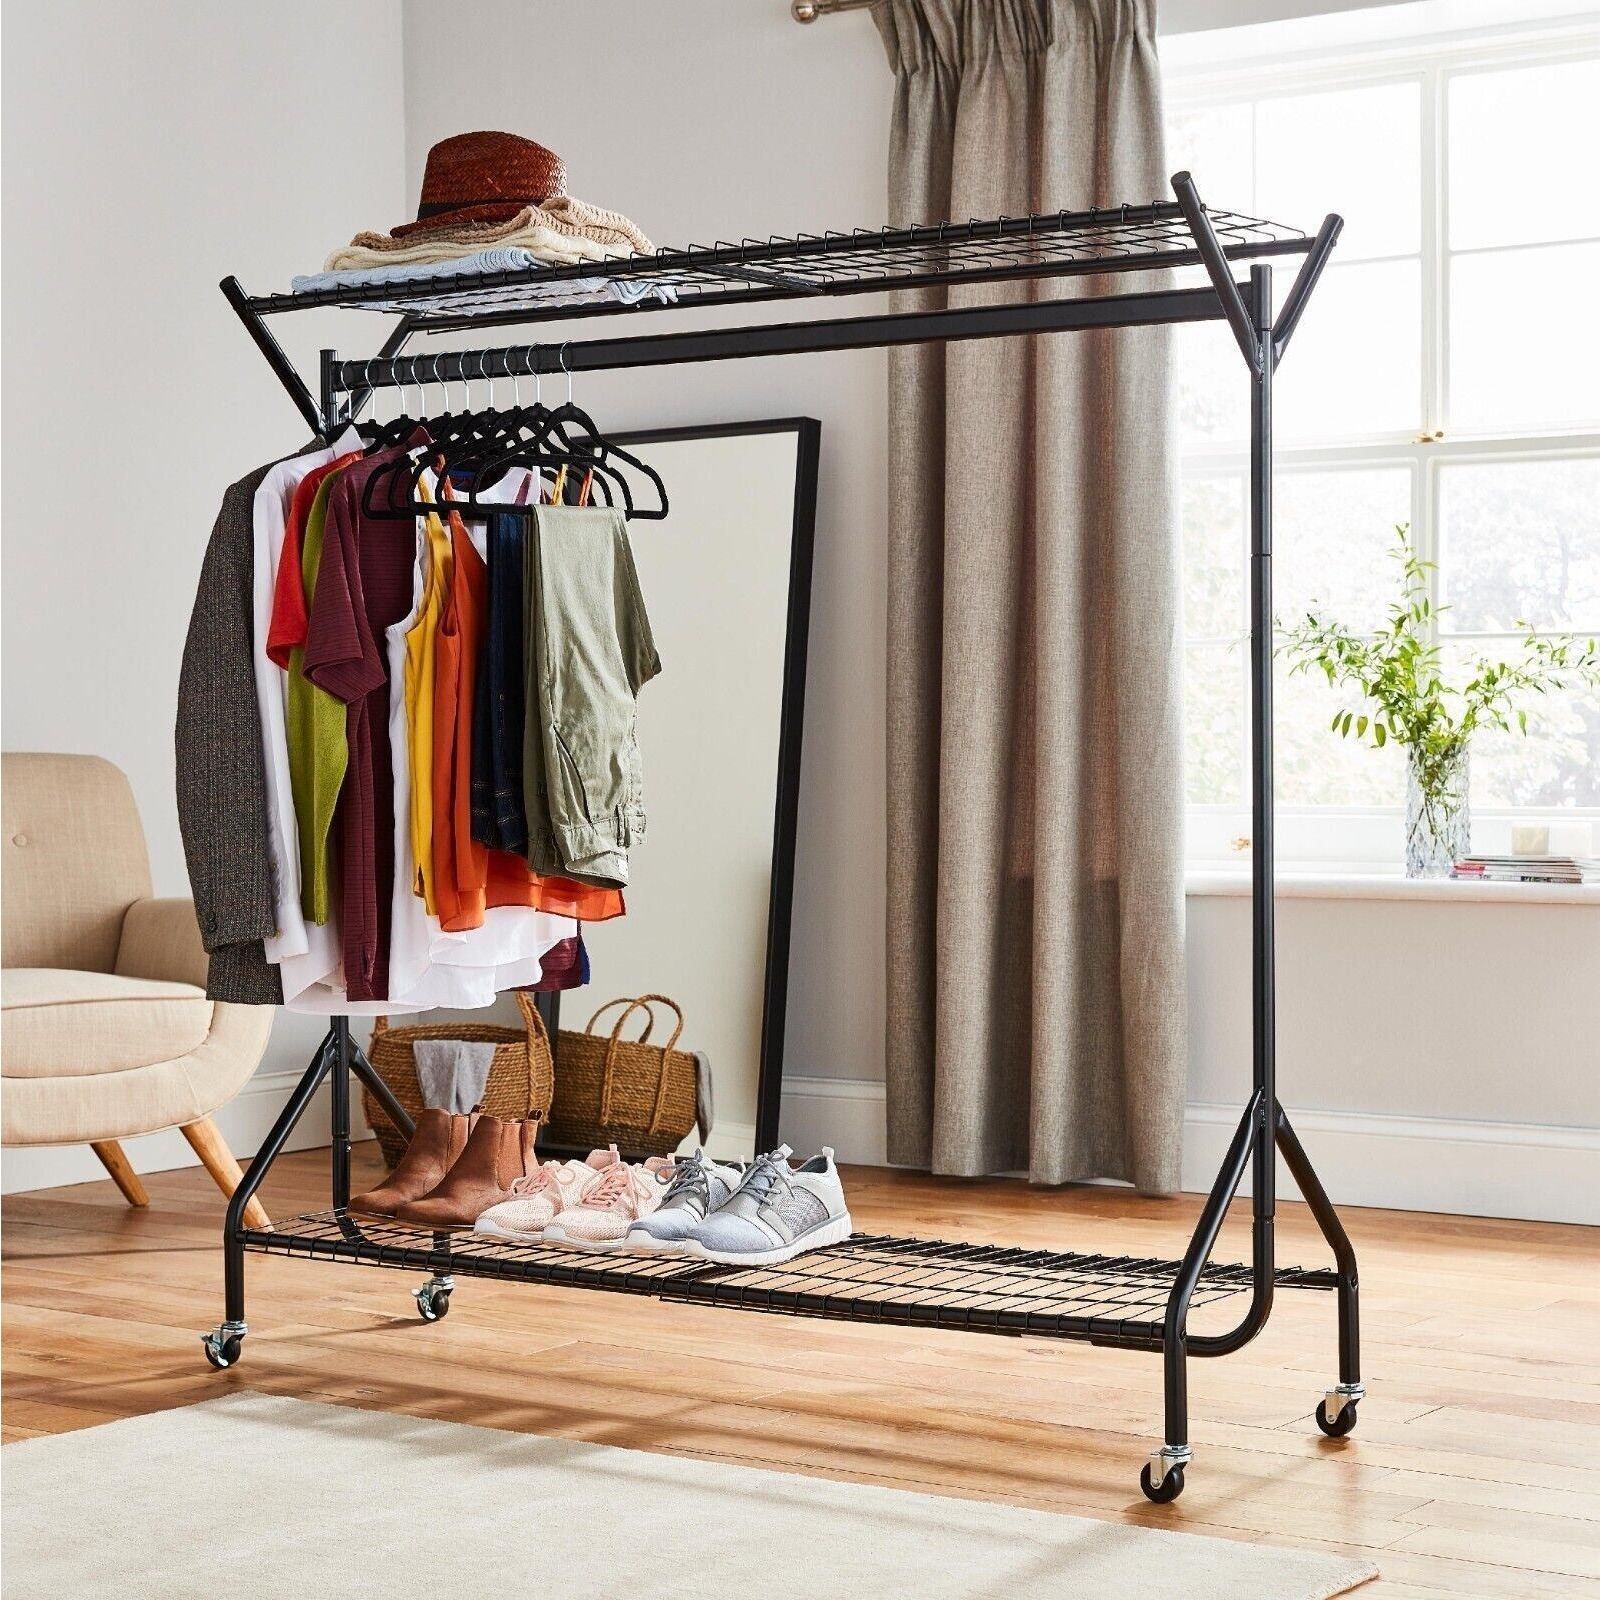 Clothing Rail Heavy Duty Hanging Clothes Shoe Hat Rack Shelves With Wheels 4ft x 5ft - image 1